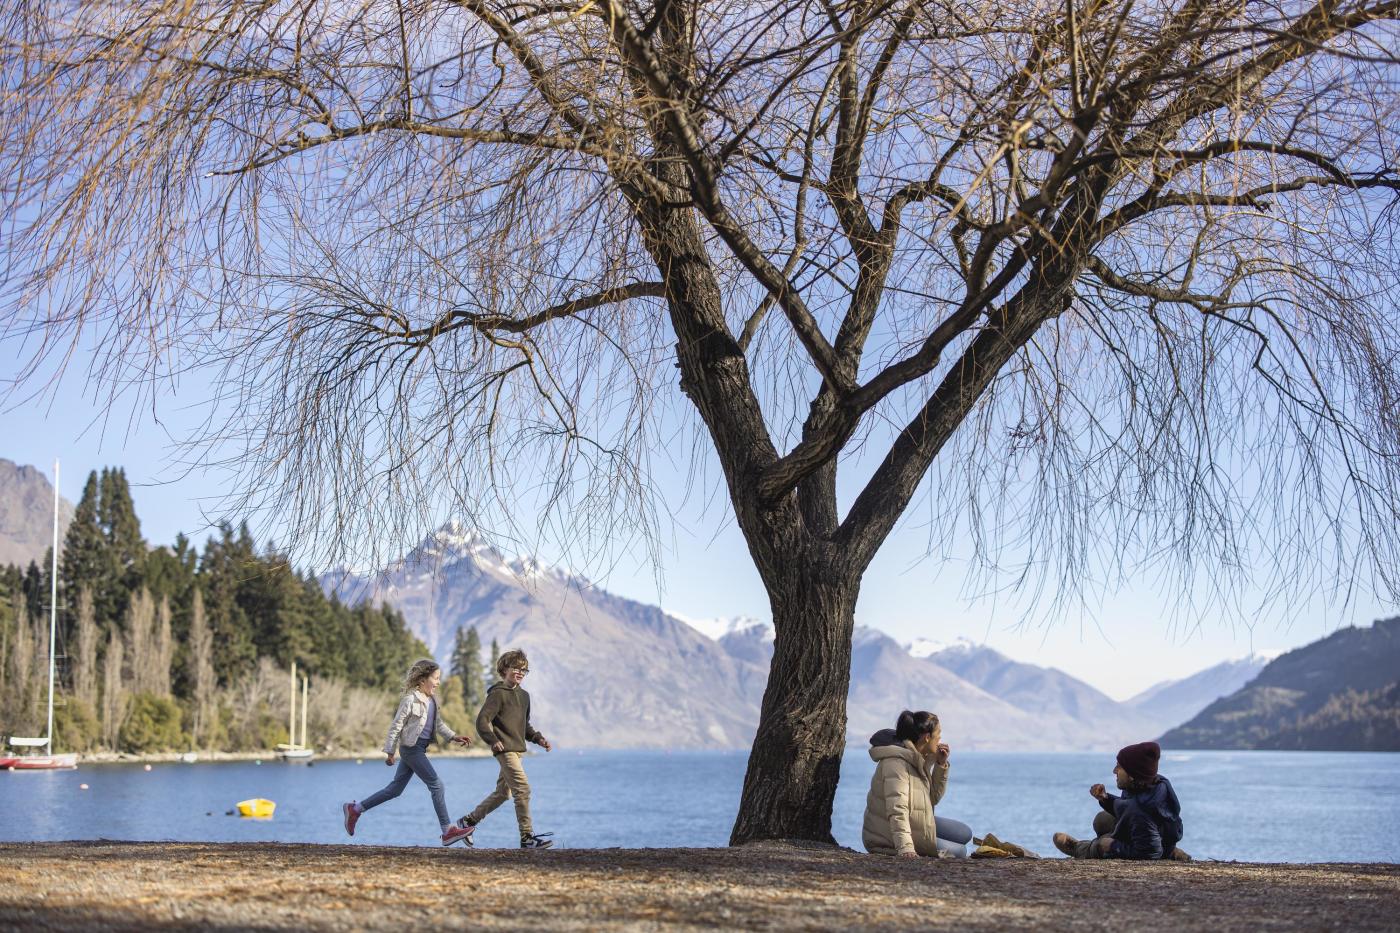 Family enjoying themselves on Queenstown Beach in spring